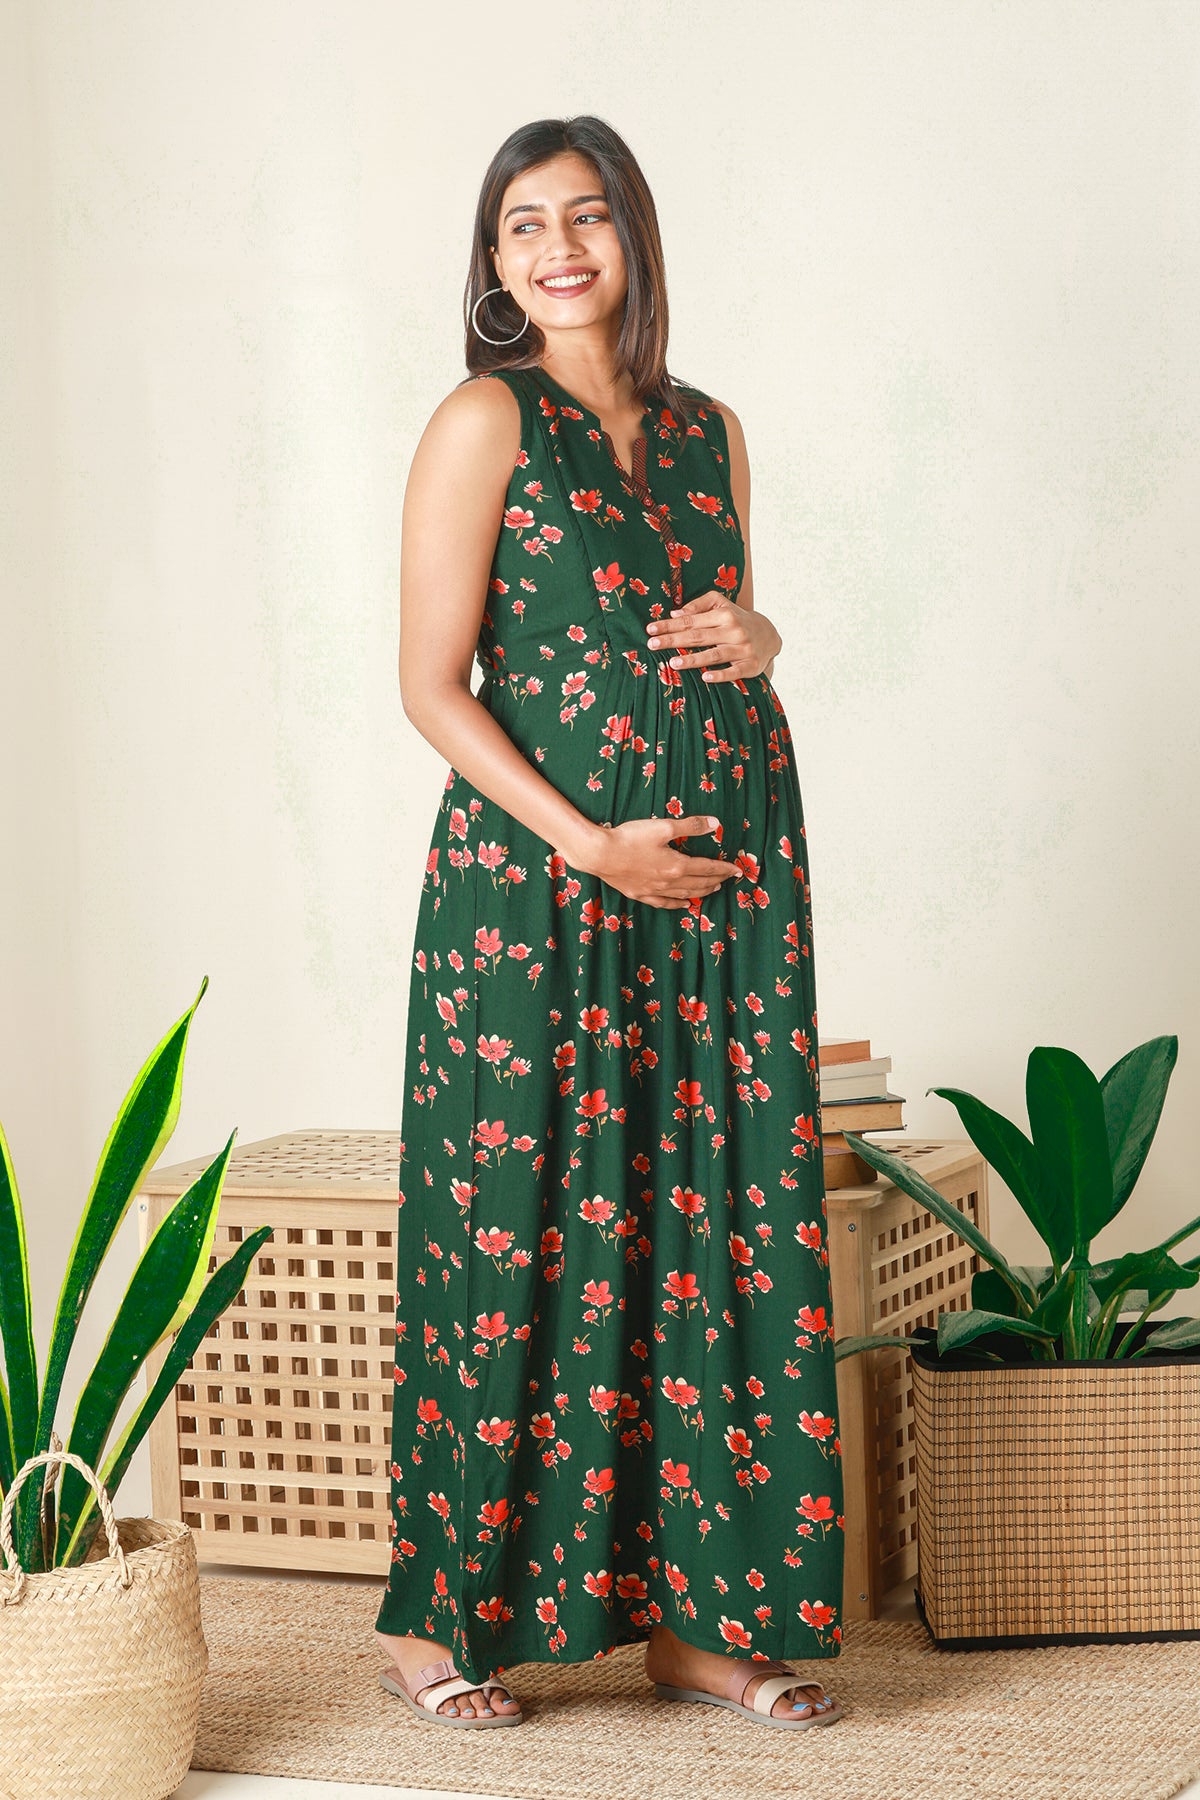 Contemporary Floral Printed Maternity Dress - Green